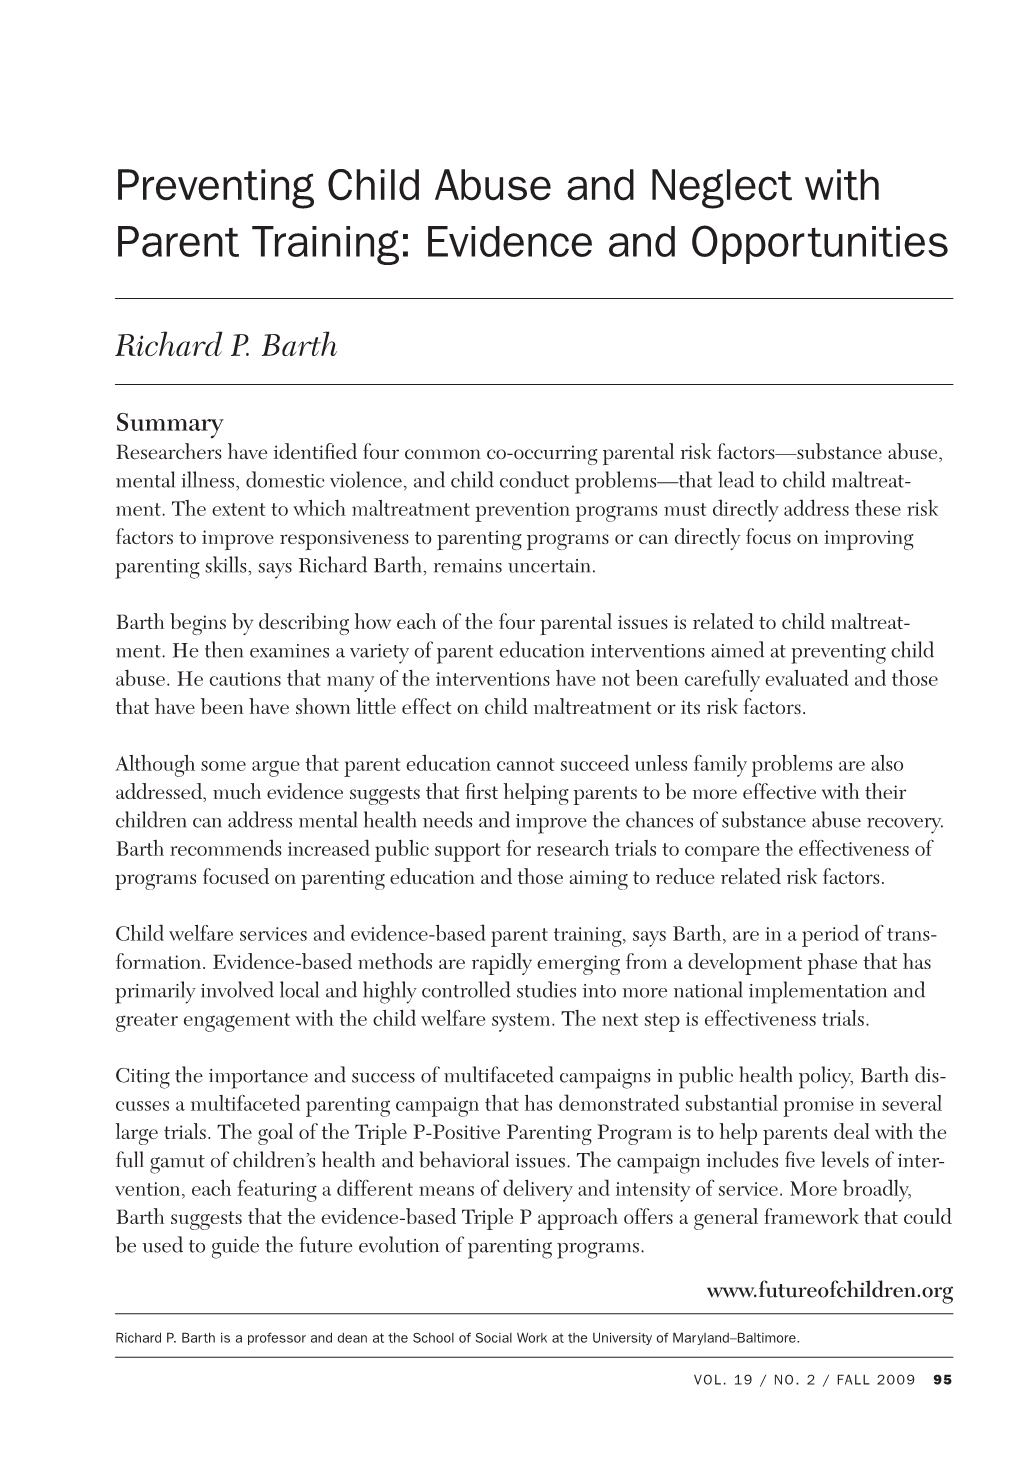 Preventing Child Abuse and Neglect with Parent Training: Evidence and Opportunities